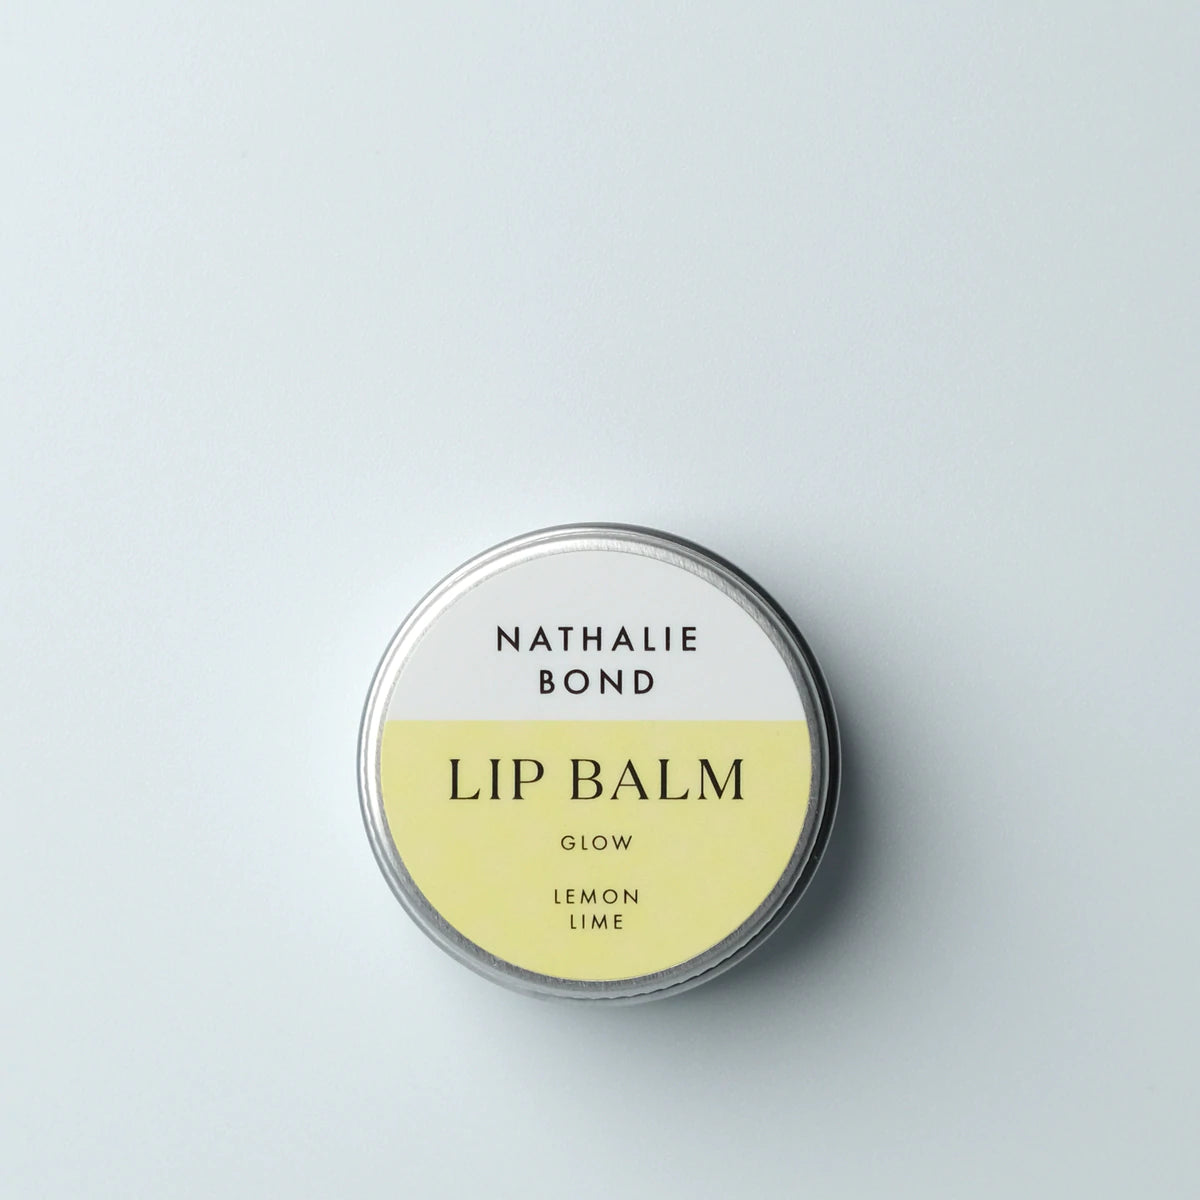 Load image into Gallery viewer, The Nathalie Bond Glow vegan lip balm offer buttery richness to help keep dry lips velvety and supple | Cruelty Free, Plastic Free
